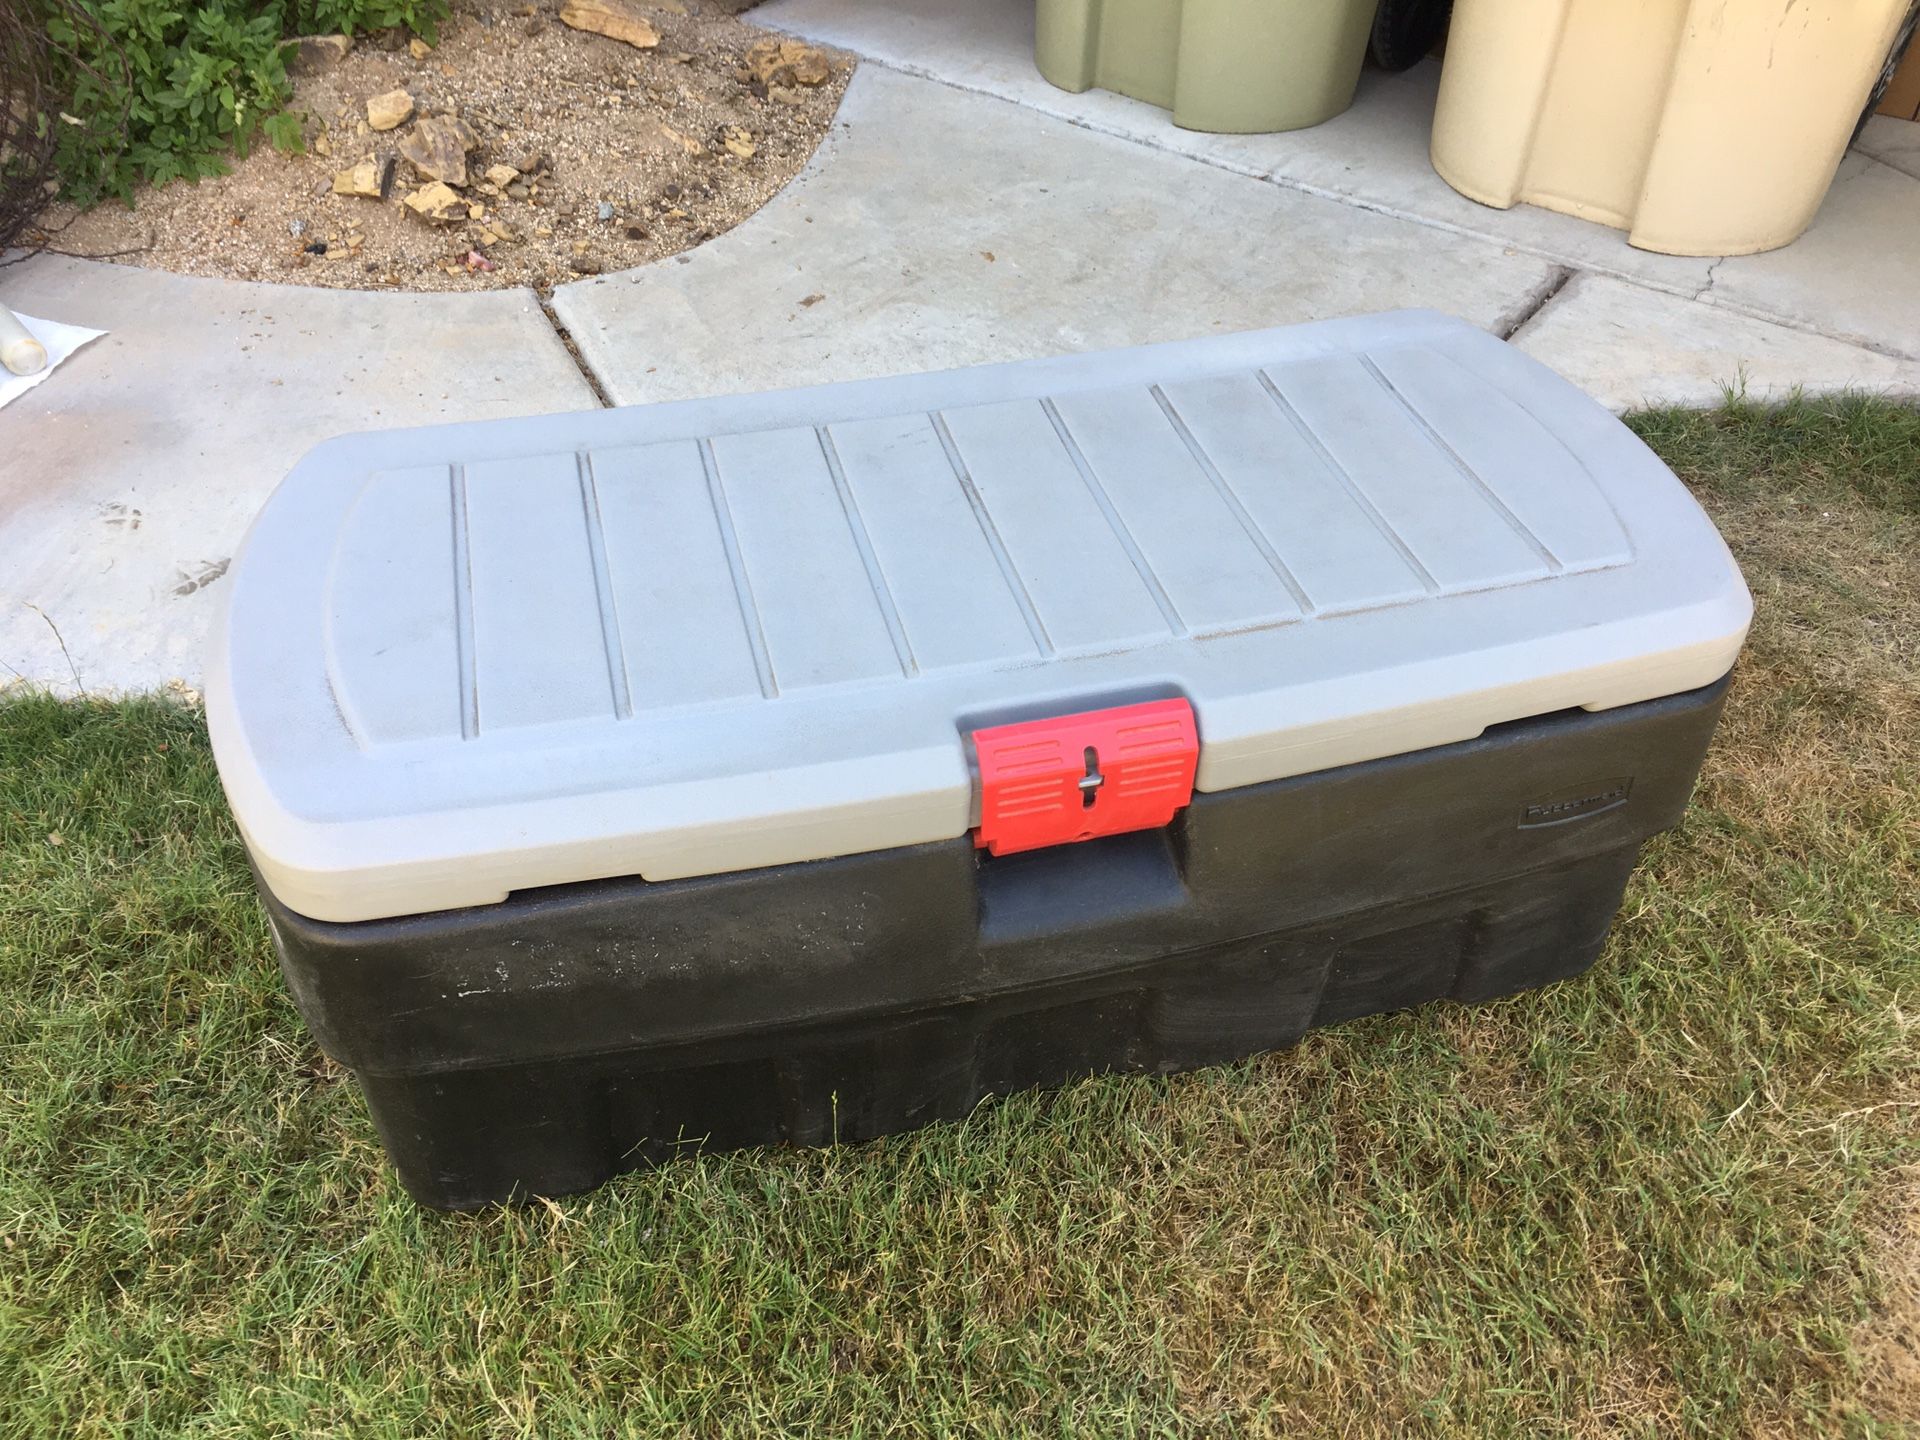 Rubbermaid Large Action Packer lockable storage bin container camping boating garage 42”x20”x17”